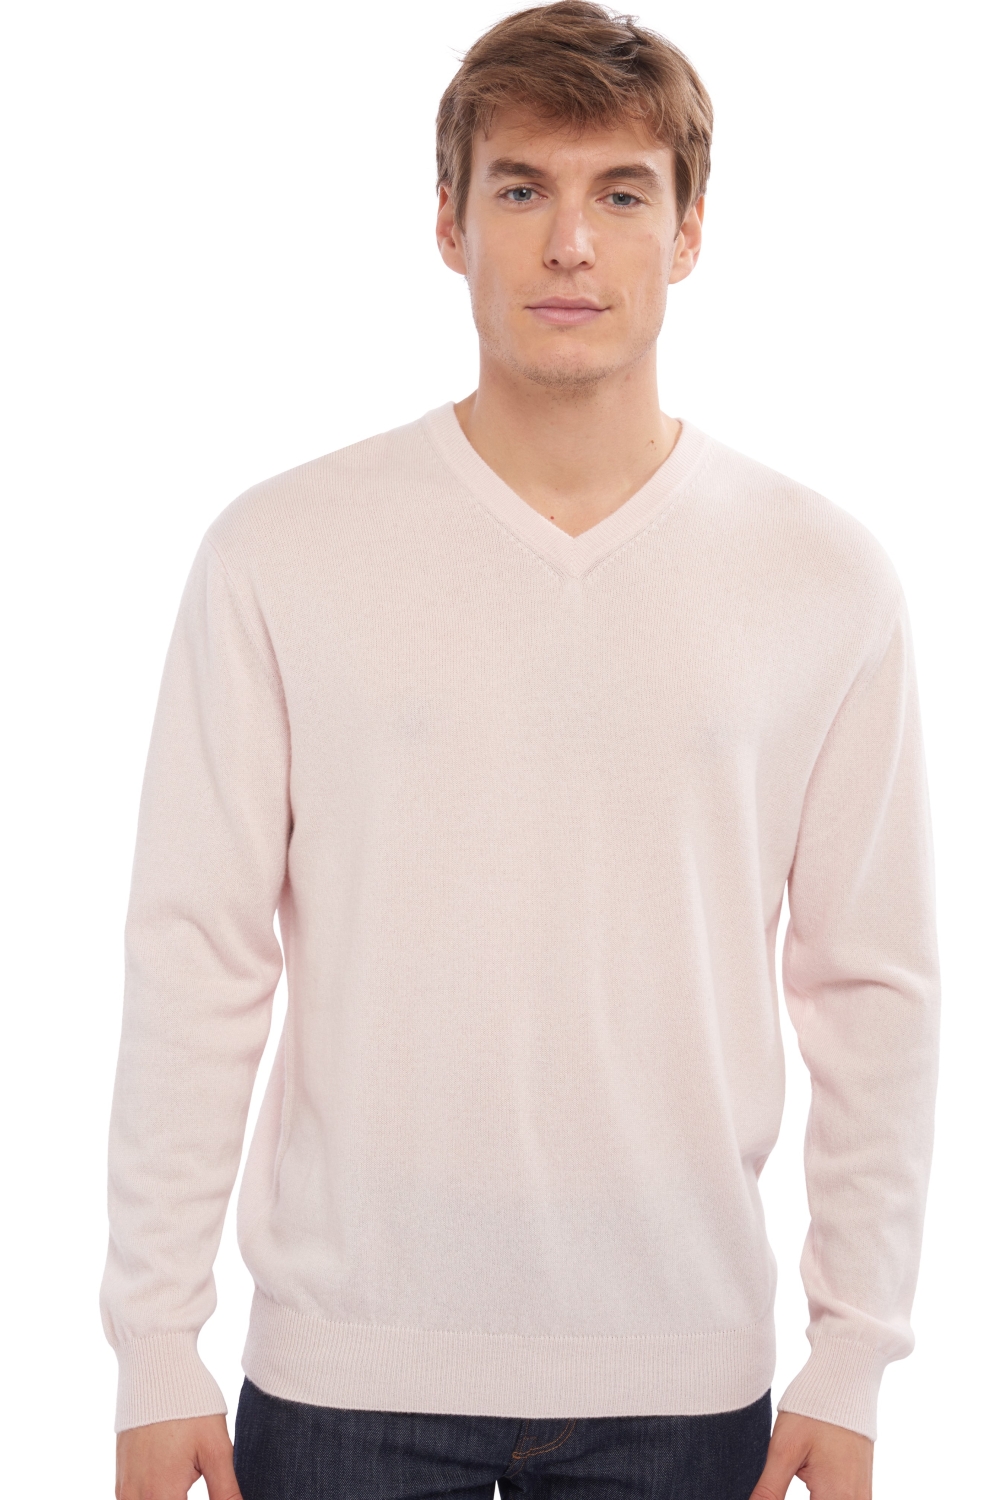 Cachemire pull homme col v gaspard rose pale s